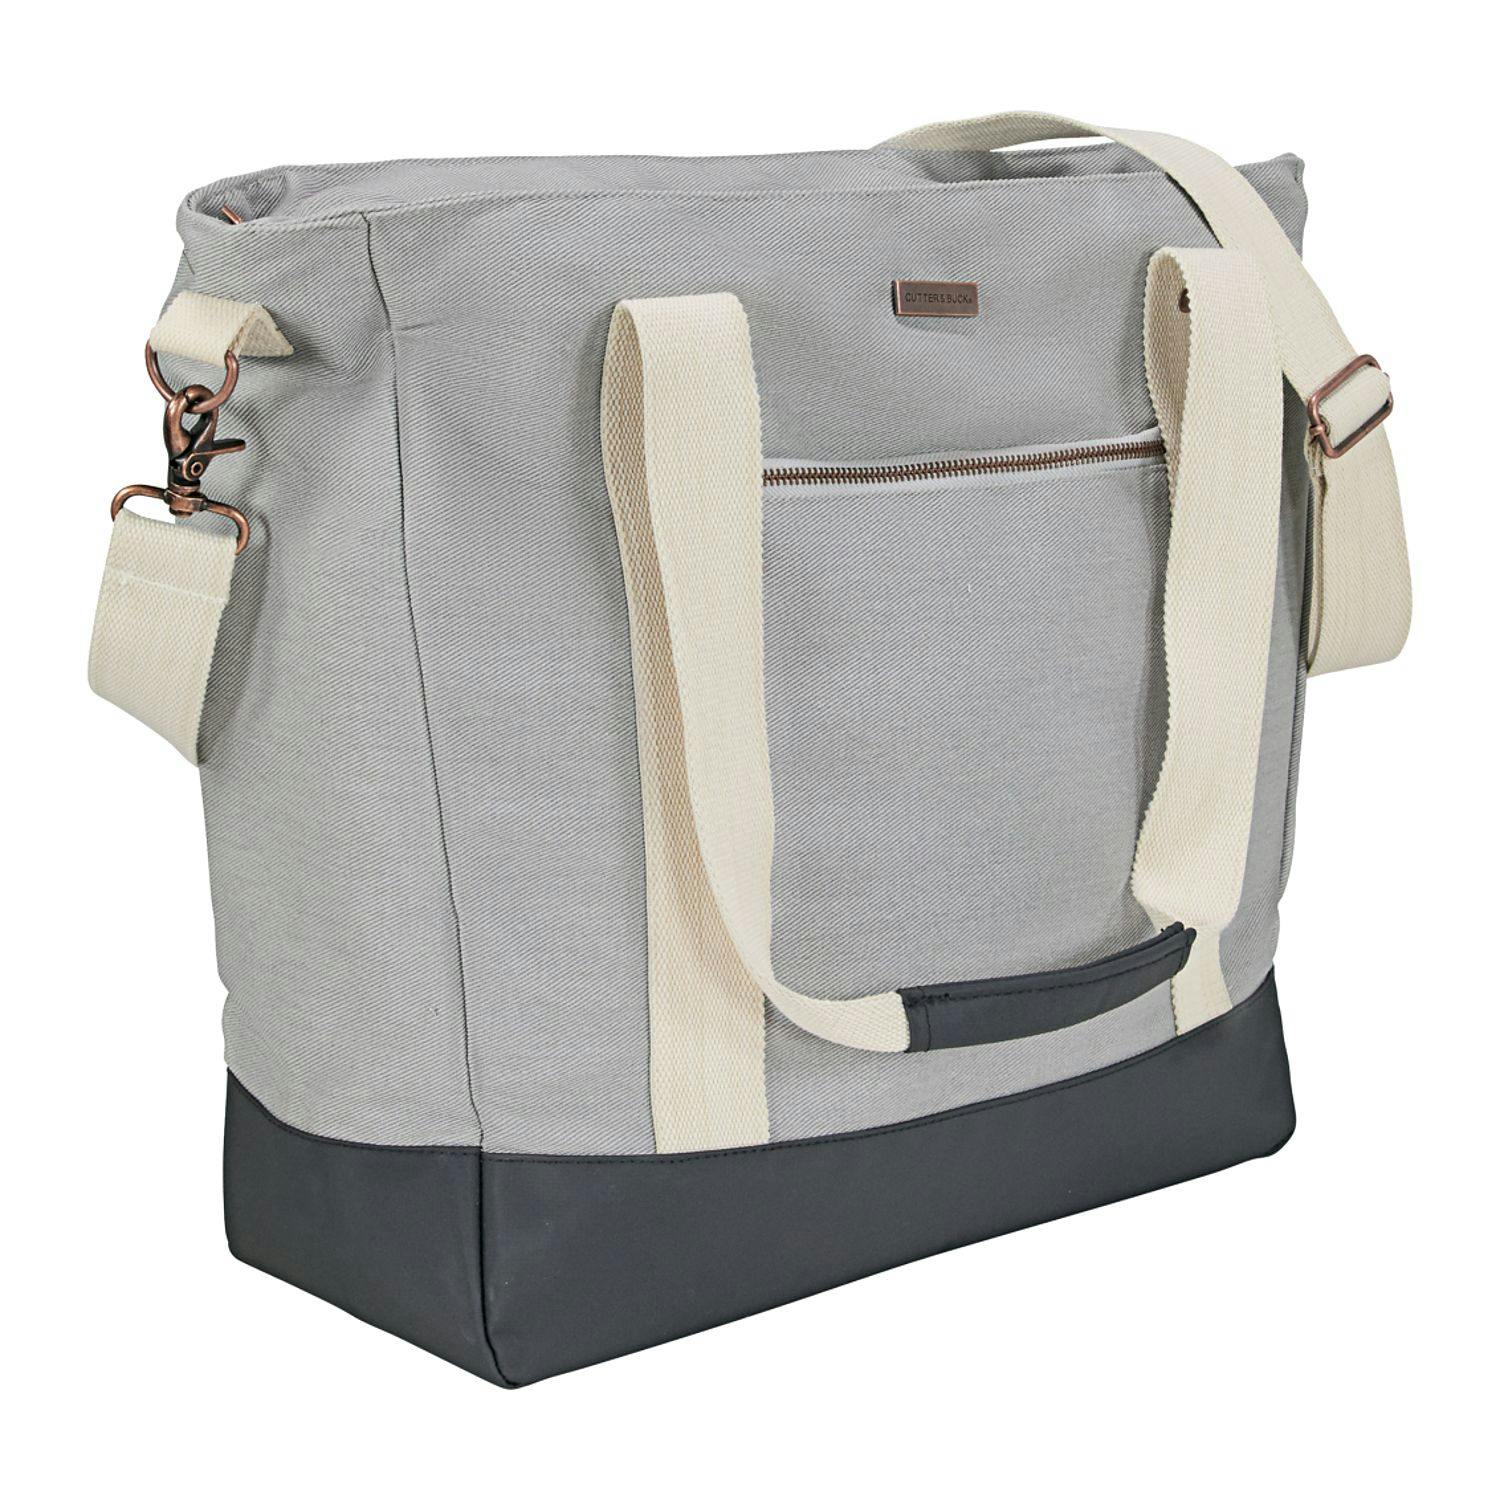 Cutter & Buck® Cotton Computer Tote - additional Image 3